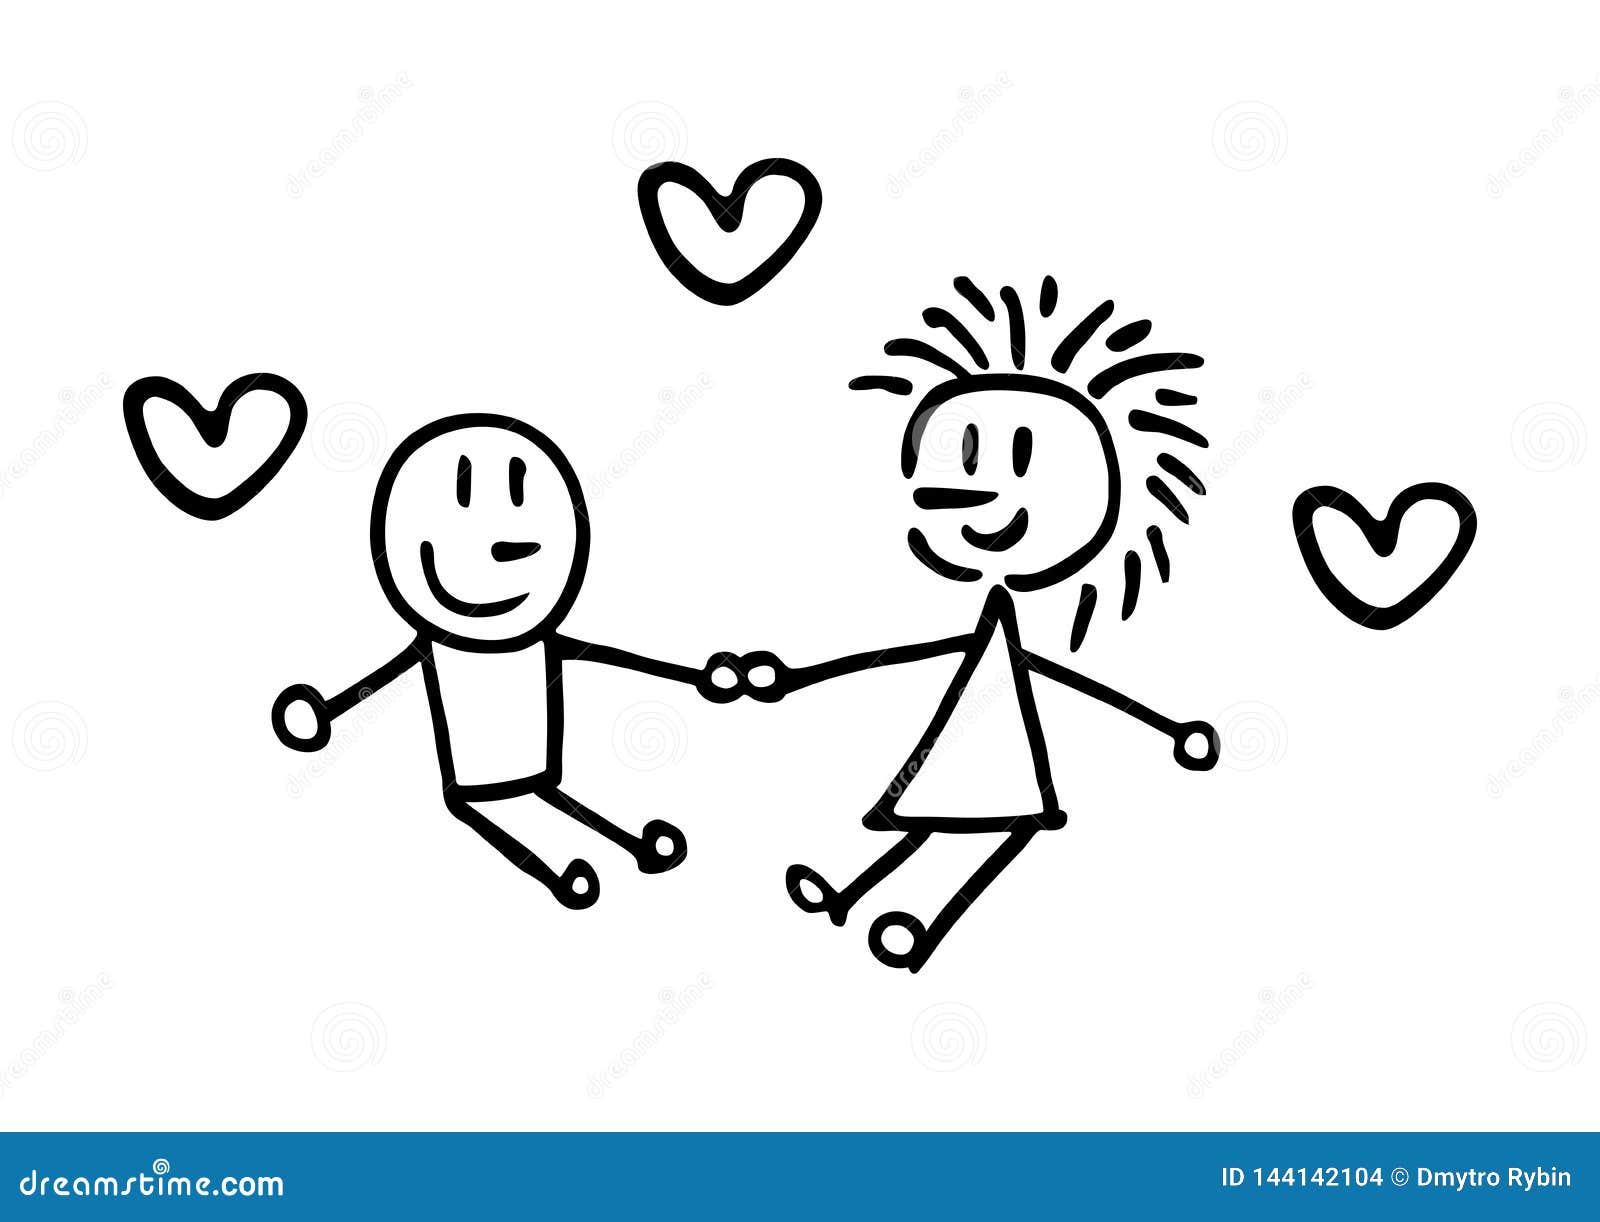 Boy And Girl Holding Hands With A Heart Lovers Black And White Stock Illustration Illustration Of Human Communication